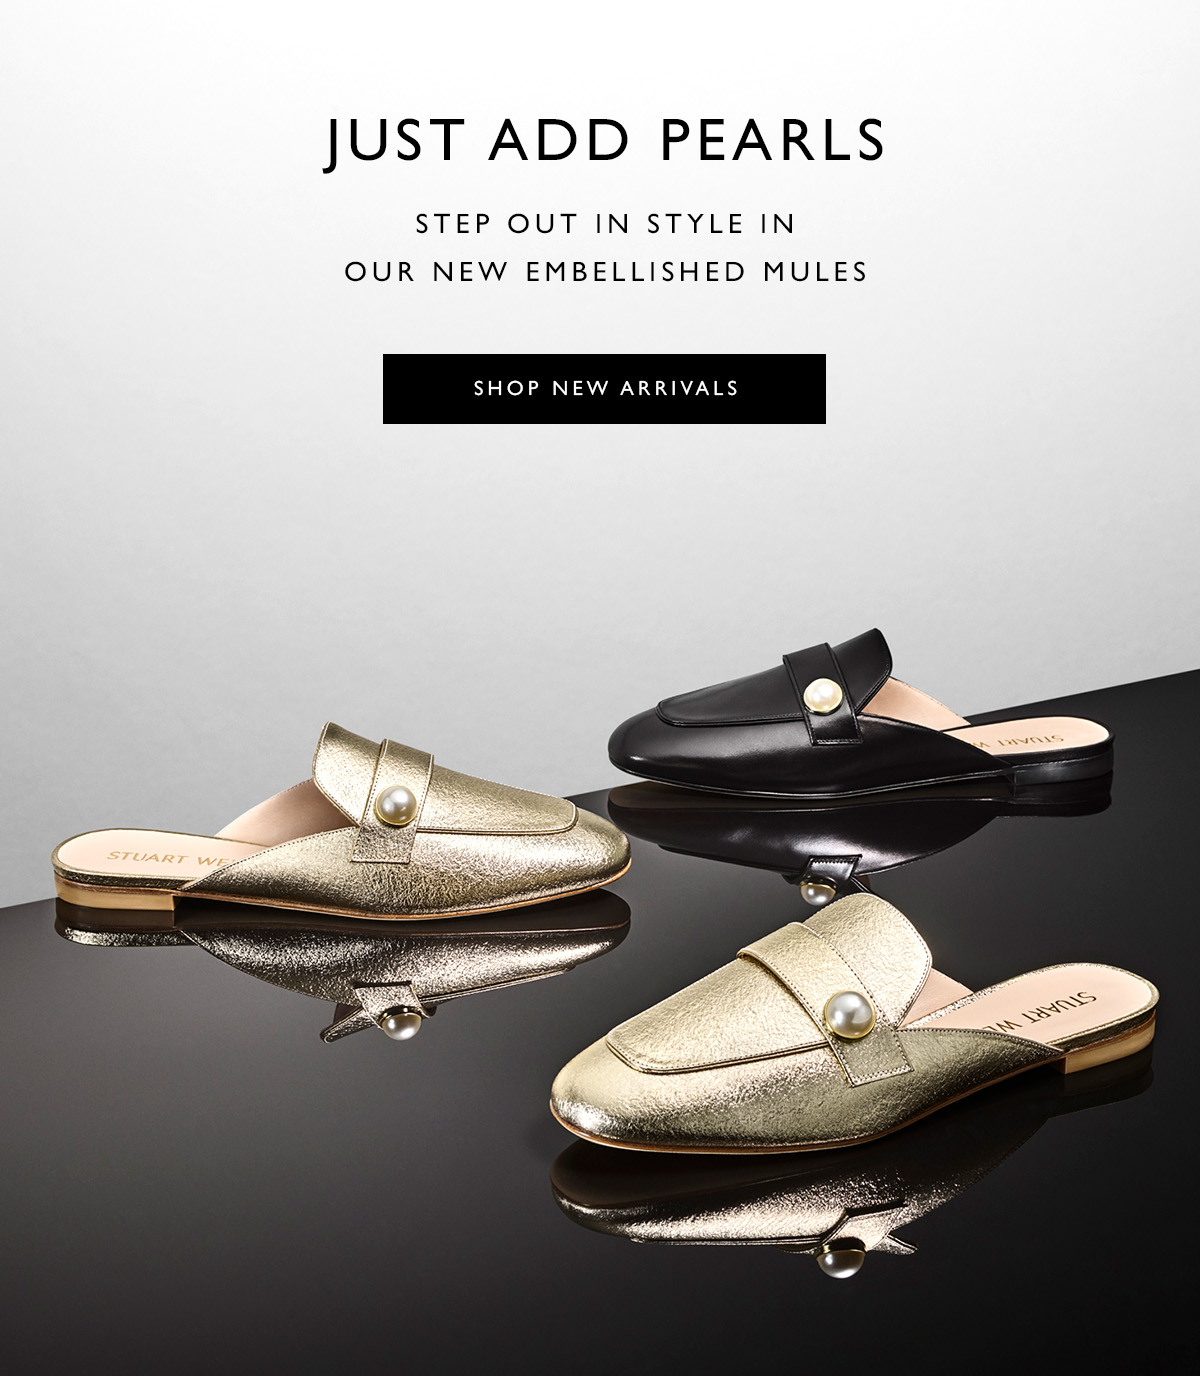  Just Add Pearls. Embellished loafers offer a feminine new spin on our best-selling WYLIE STAR mule. SHOP NEW ARRIVALS